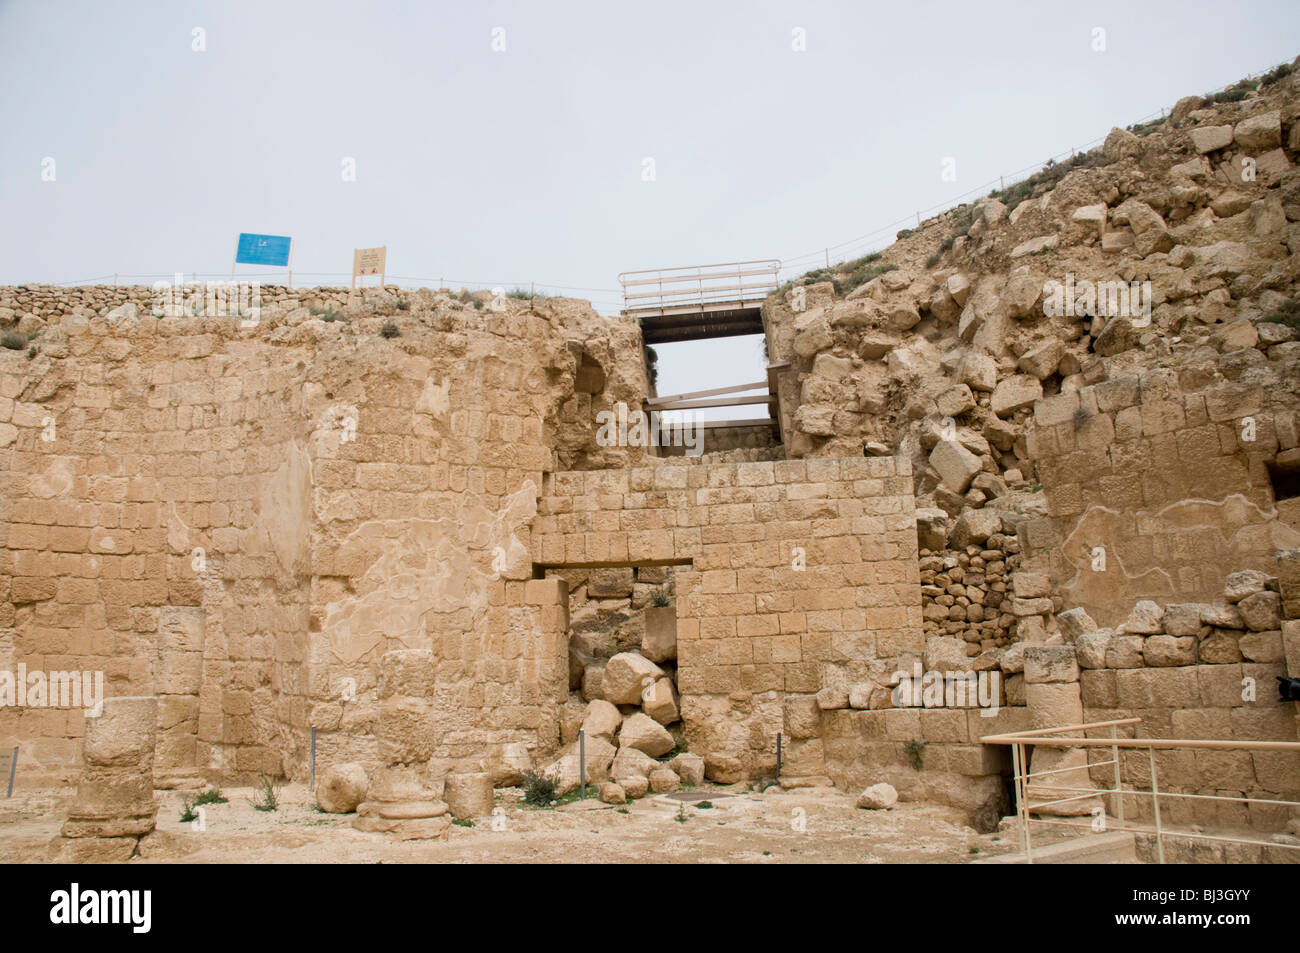 Israel, West Bank, Judaea, Herodion a castle fortress built by King Herod 20 B.C.E. Remains of the castle. Main Entrance Stock Photo